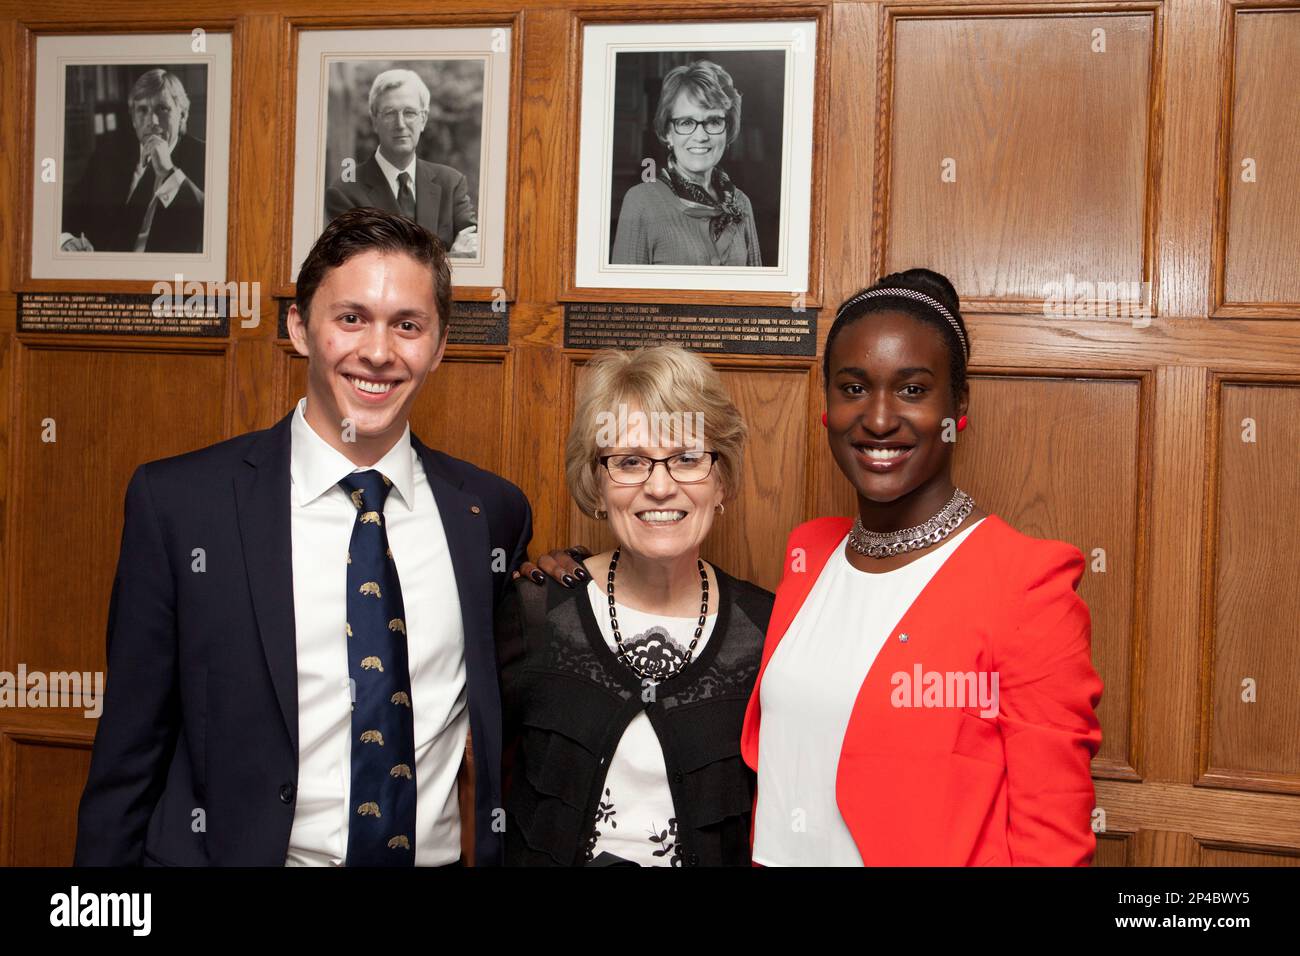 Adam Kleven, left, and Kendall Johnson, right, pose for a picture with University of Michigan President Mary Sue Coleman after the unveiling of a bronze plaque honoring Coleman at the Michigan Union in Ann Arbor, Mich., on July 1, 2014. The plaque honoring Coleman, U-M's 13th president, adds her portrait and service tribute to the display of U-M presidents. (AP Photo / The Ann Arbor News, Patrick Record) Stock Photo